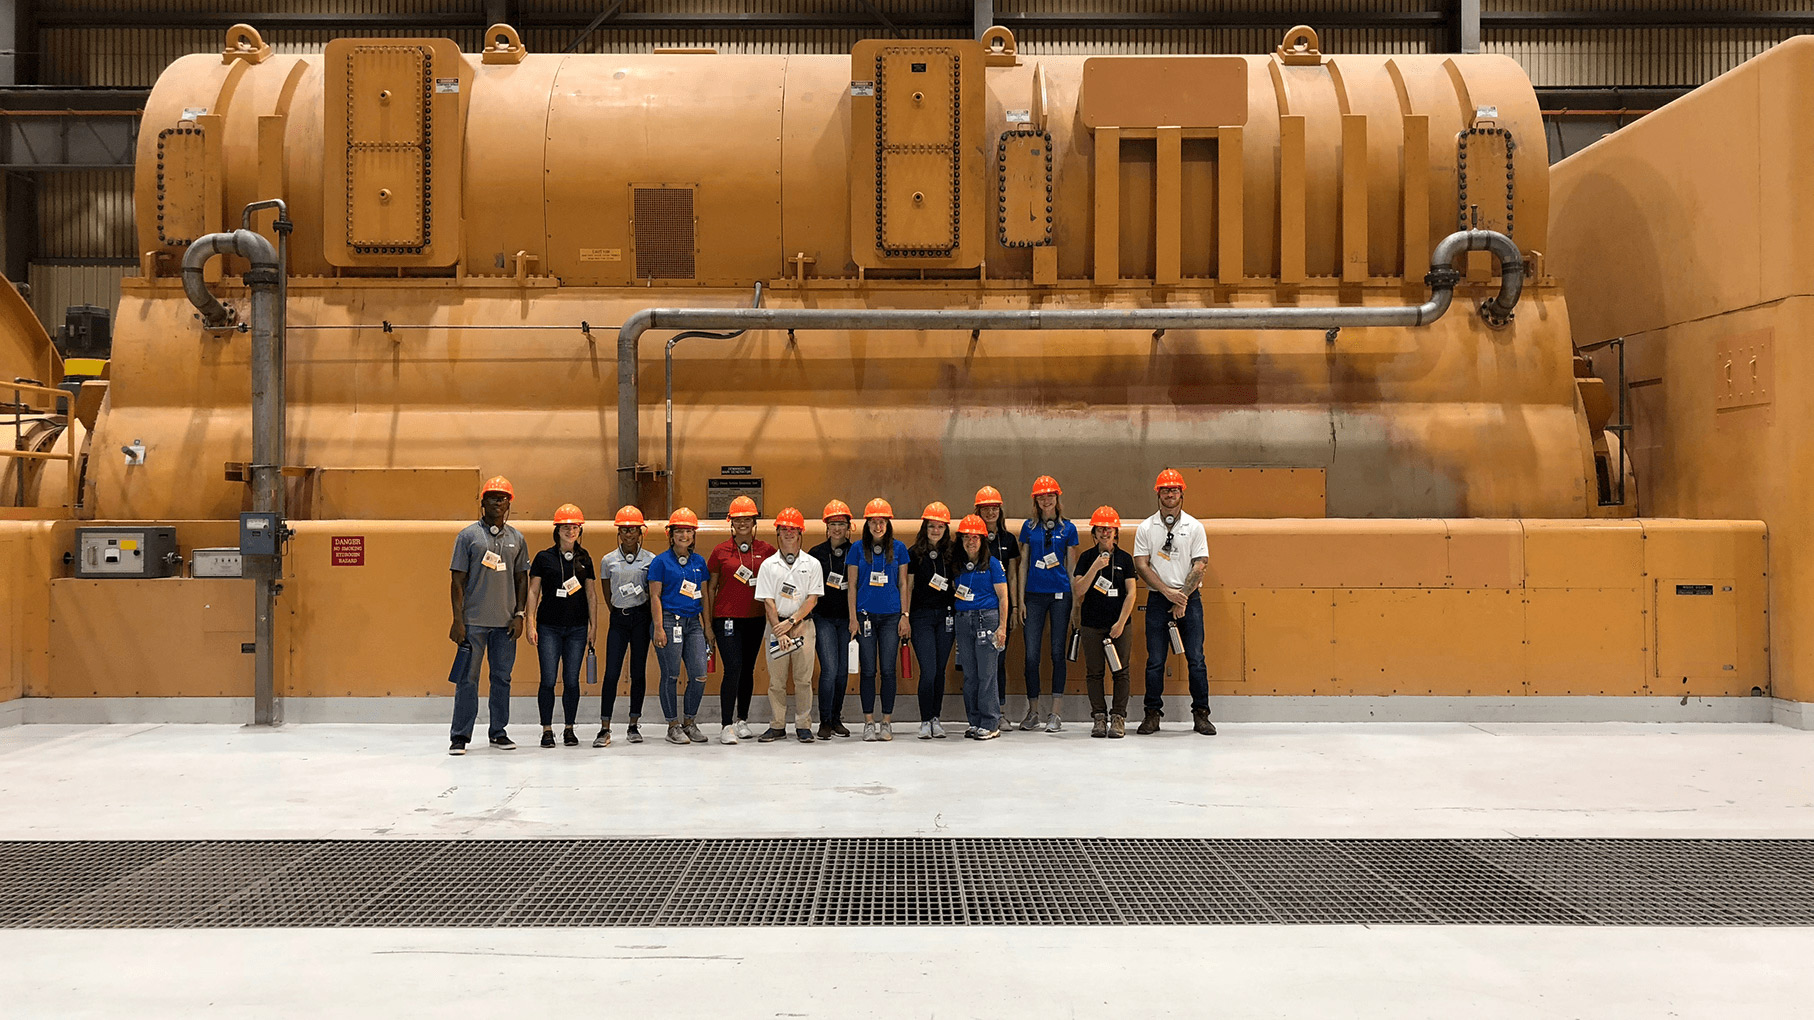 Interns standing in front of the Palo Verde nuclear generator.